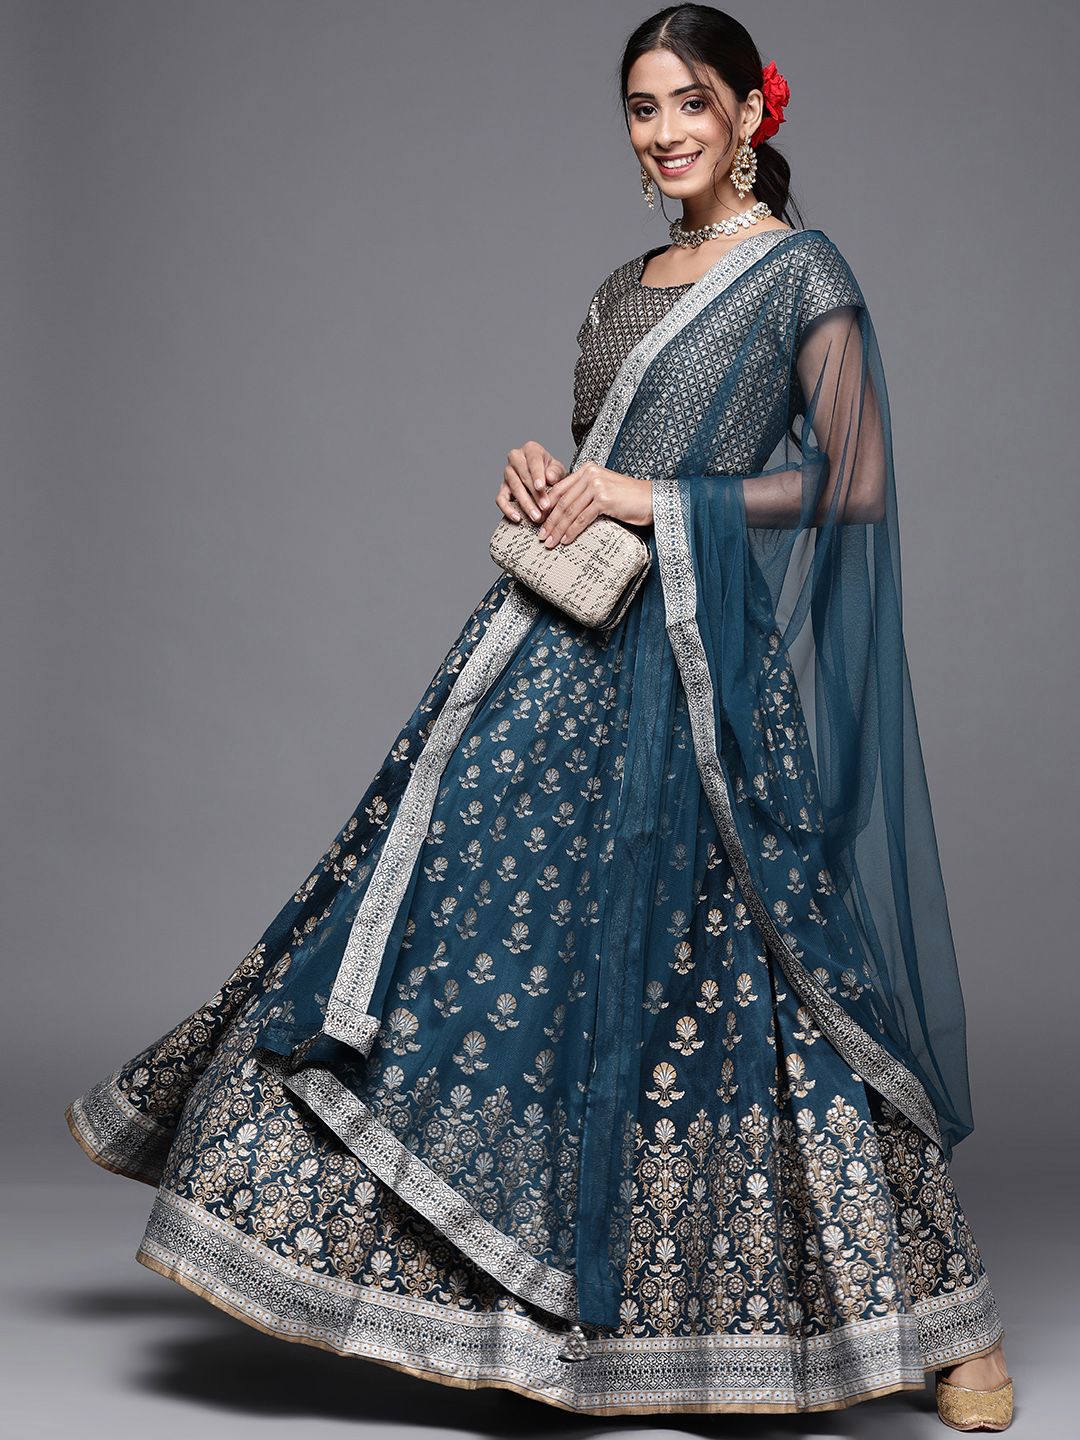 Biba Teal Blue Ethnic Motifs Printed Ready to Wear Lehenga & Blouse With Dupatta Price in India